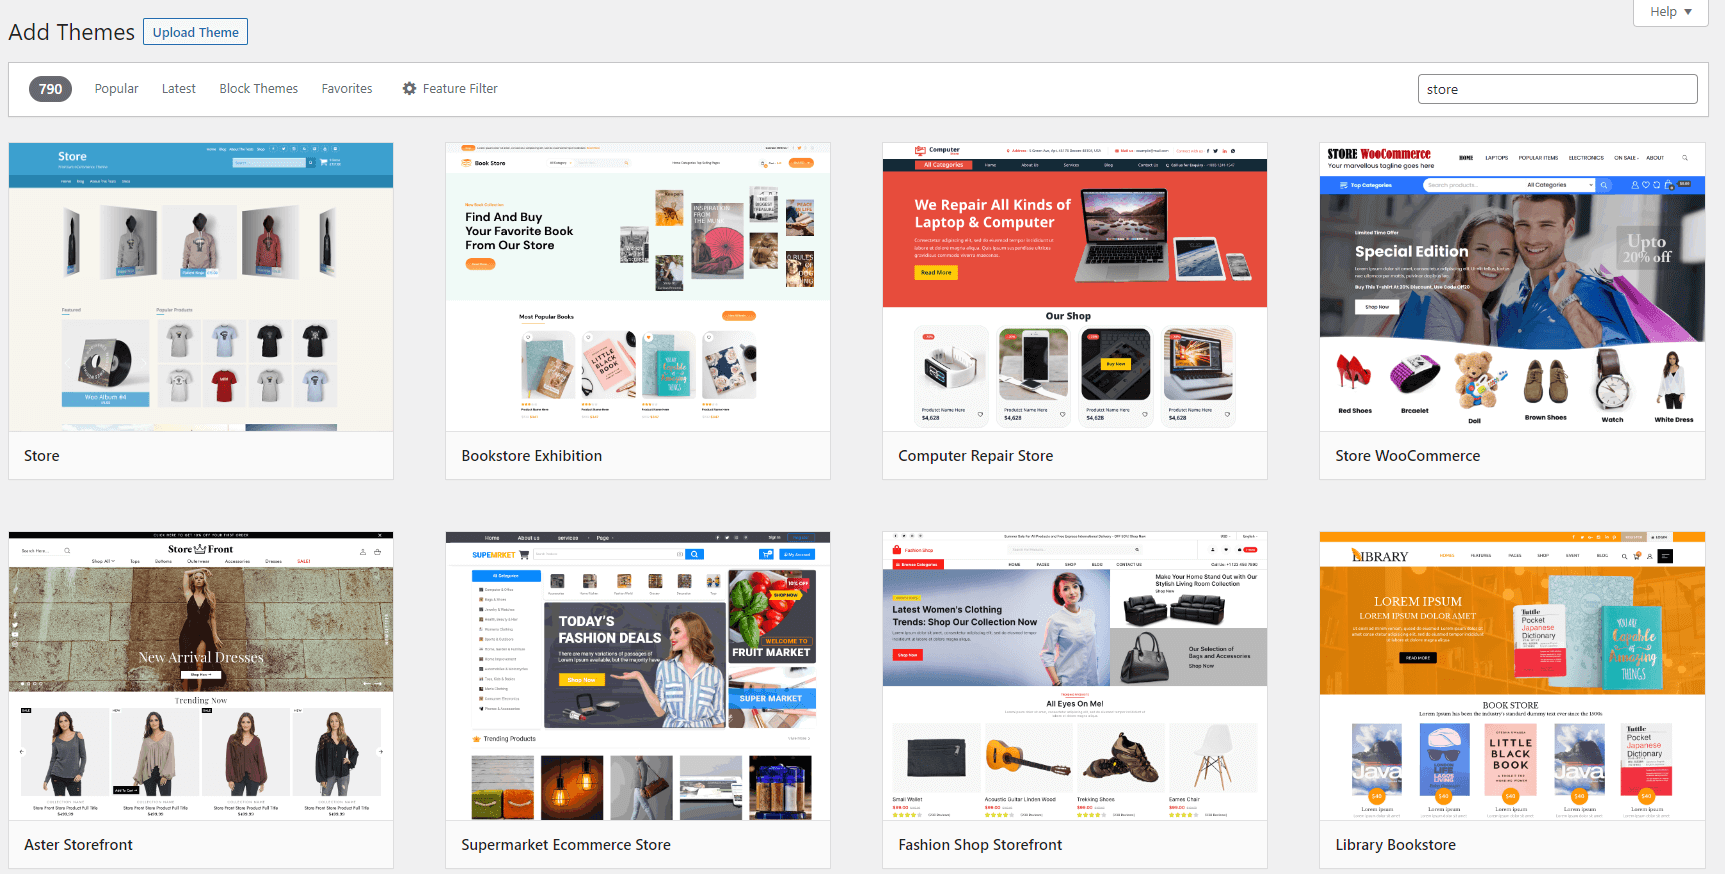 WordPress theme library search results for "store", for Shopify vs WooCommerce comparison.